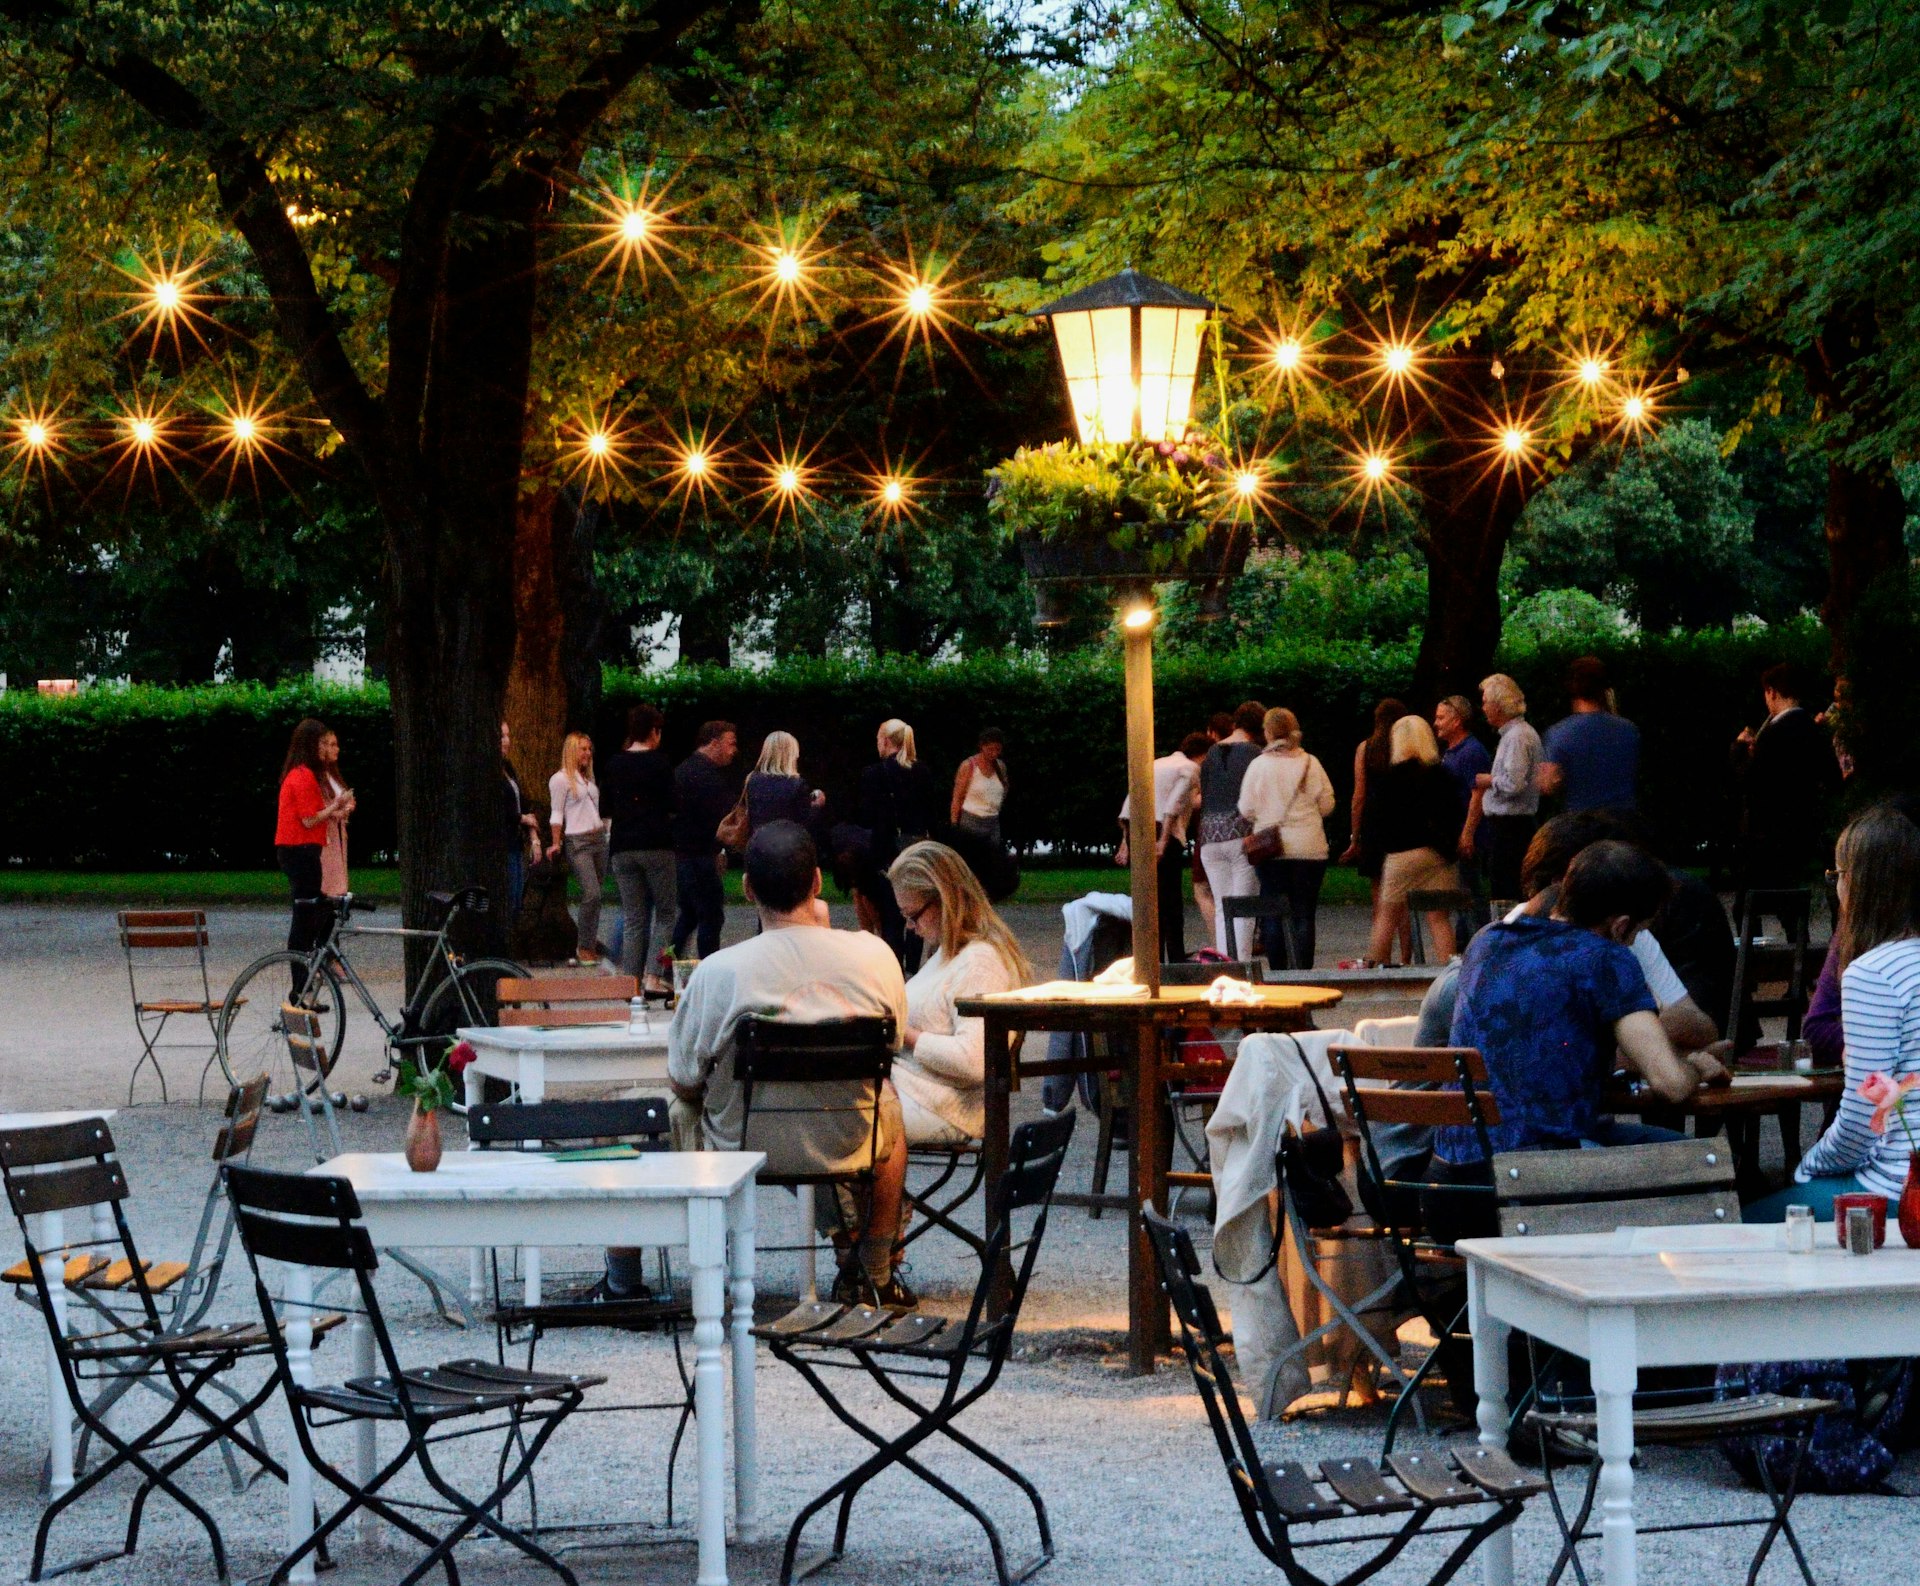 people drinking at an outdoor cafe in Munich in the evening